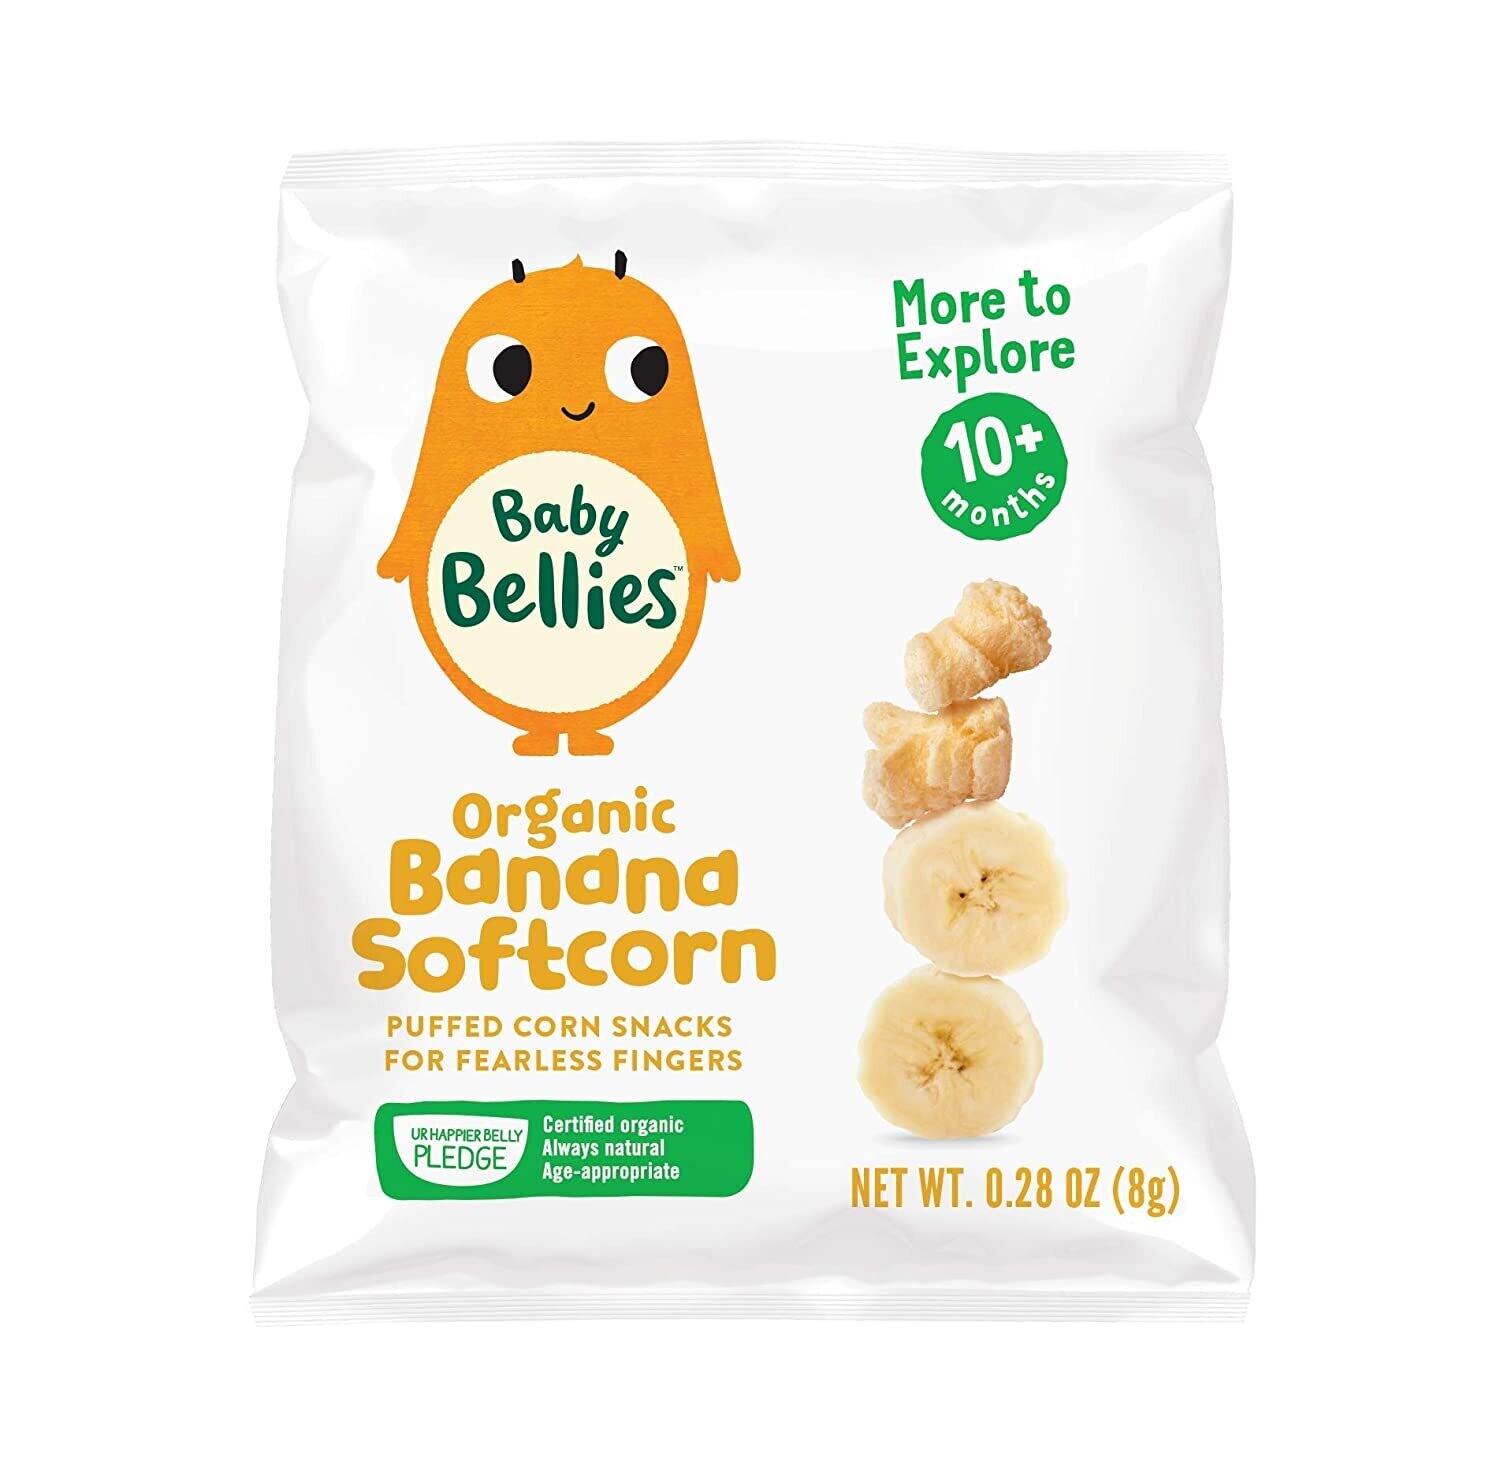 Baby Bellies Organic Banana Softcorn Puffed Corn Snacks for Fearless Fingers